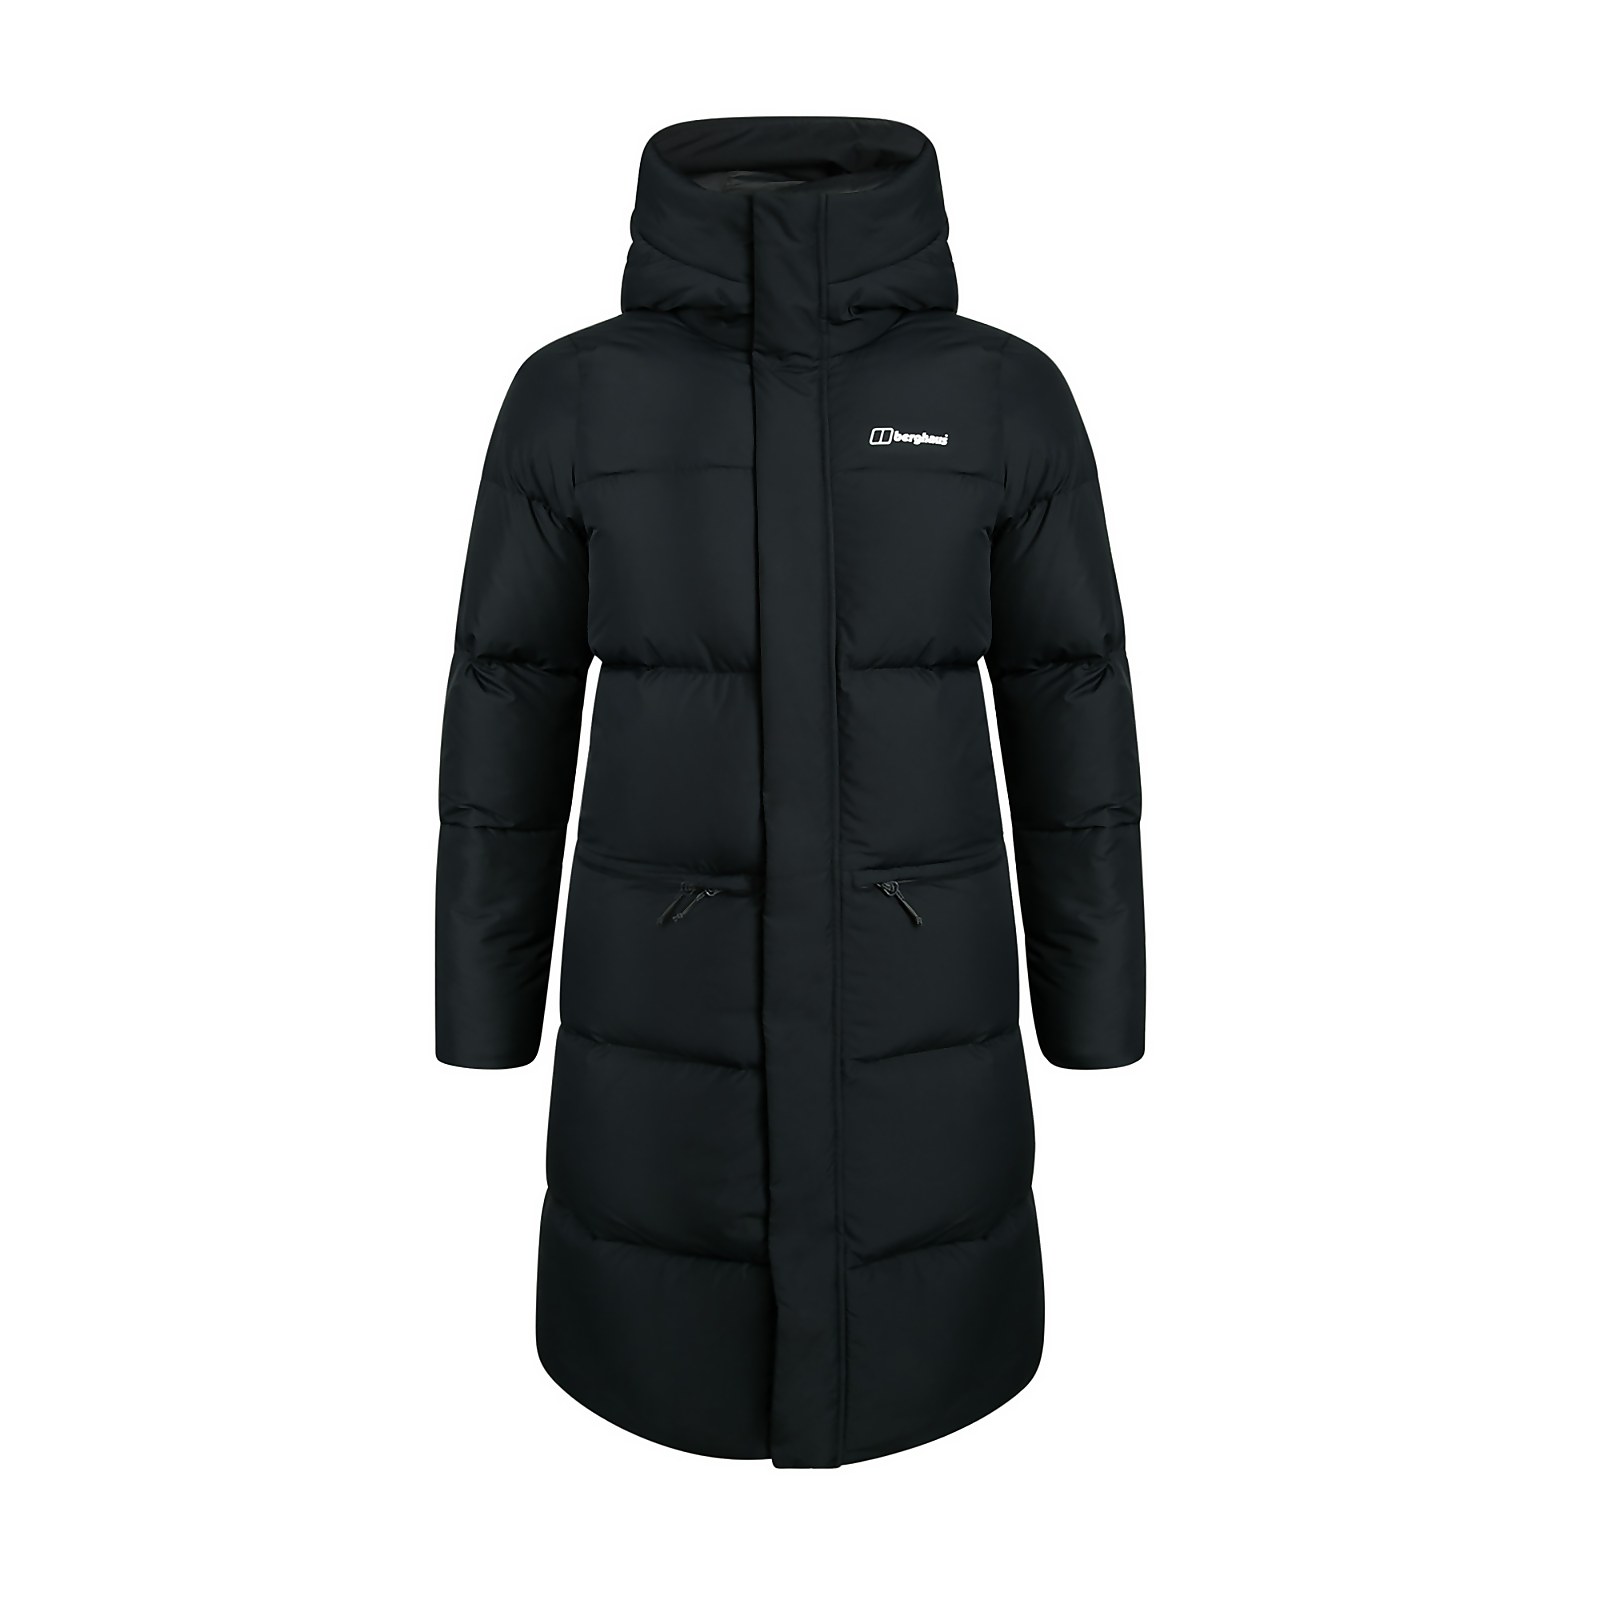 Berghaus Womens Combust Reflect Long Down Insulated Jacket - Black - 10